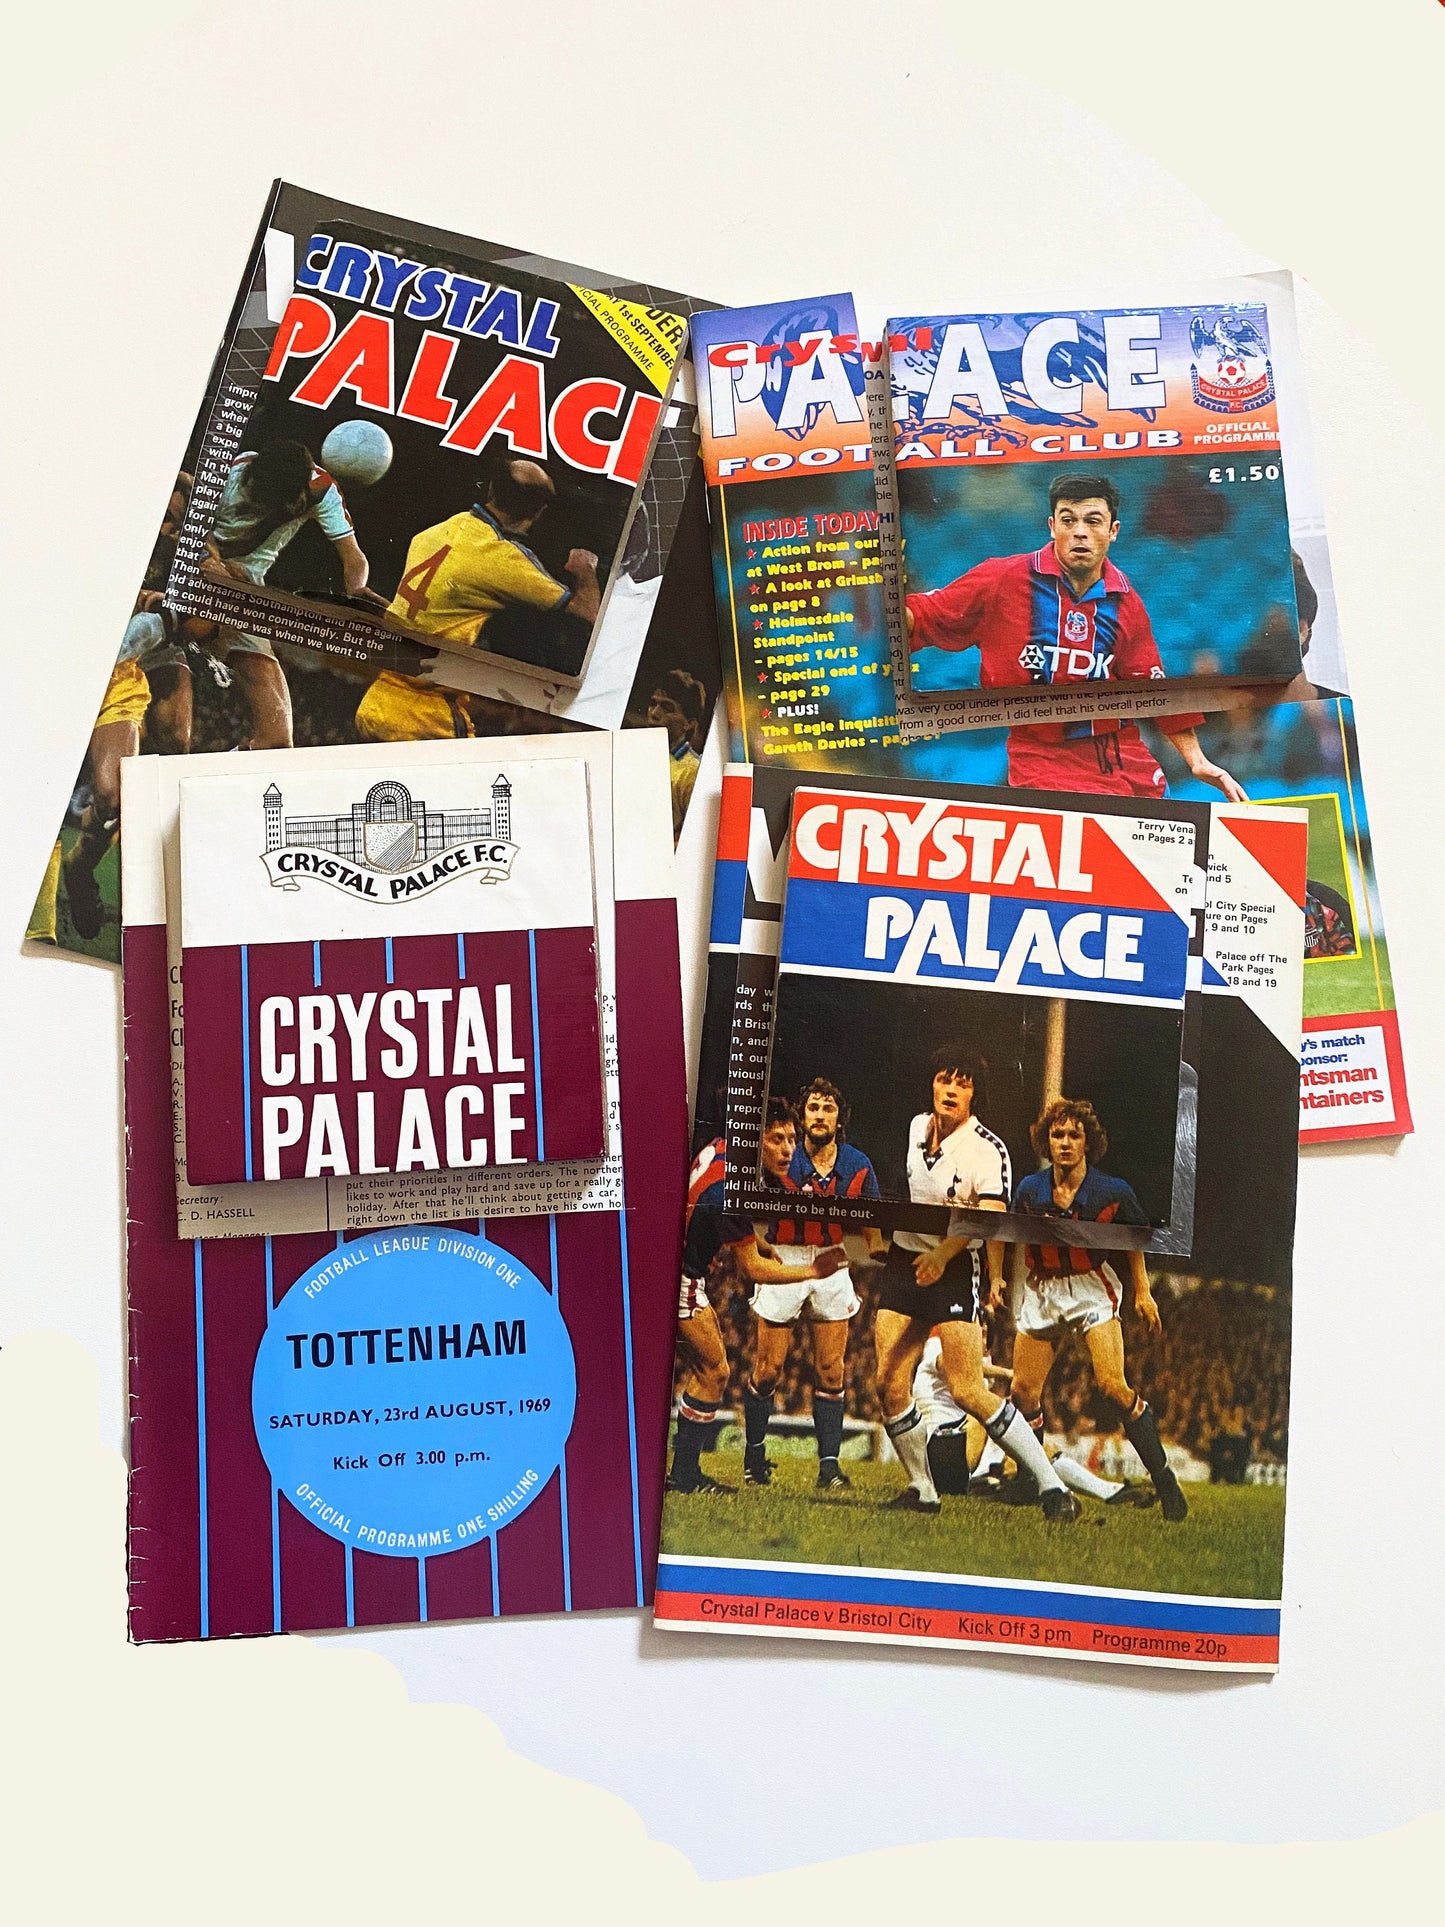 Vintage Crystal Palace Football Programme Coasters. Upcycled Football Gift. Man Cave Home Decor. Retro Football Gift for Dad.